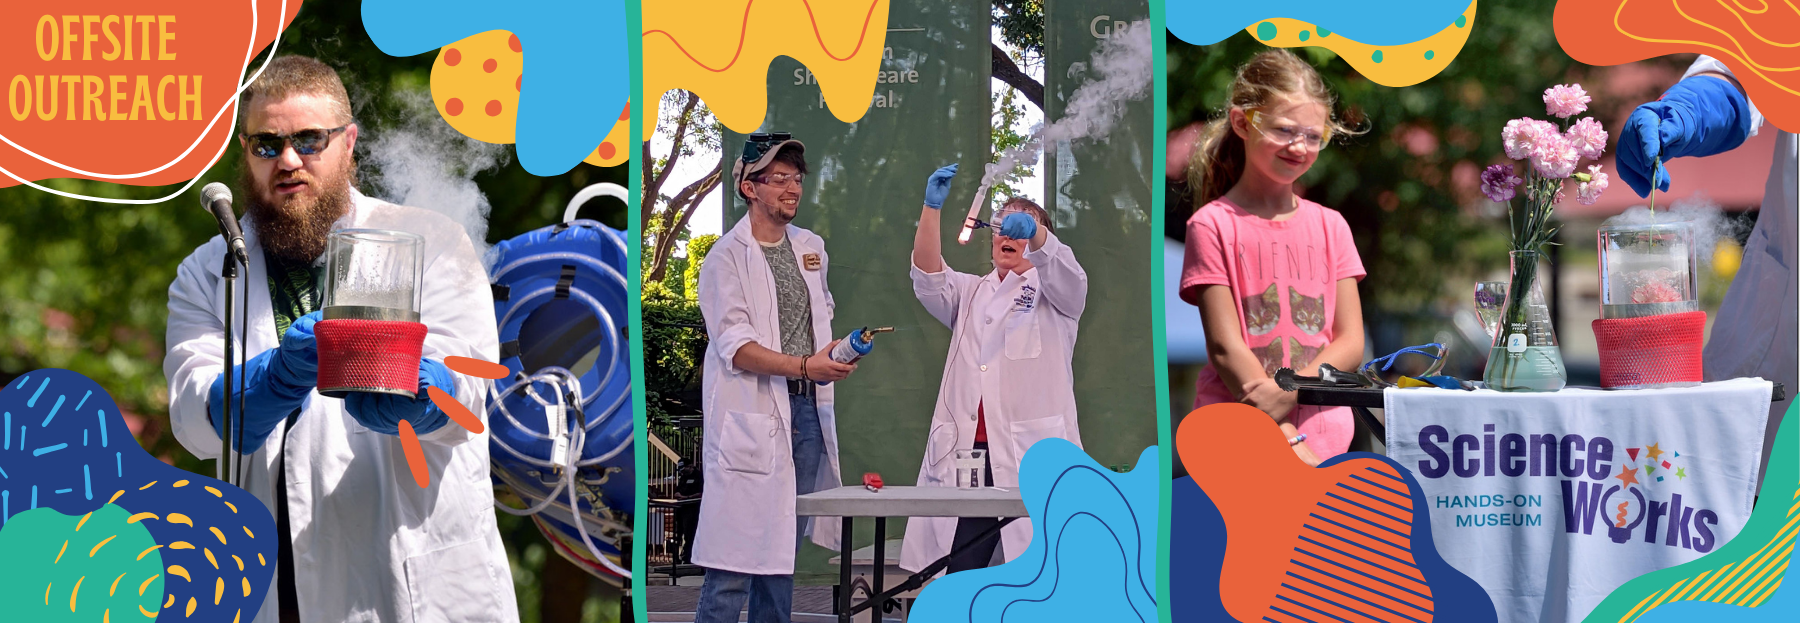 Left to Right: Toby in a lab coat with liquid nitrogen doing a ScienceLive, Finn and Ash in lab coats doing a ScienceLive at OSF, Girl watches a ScienceLive up close